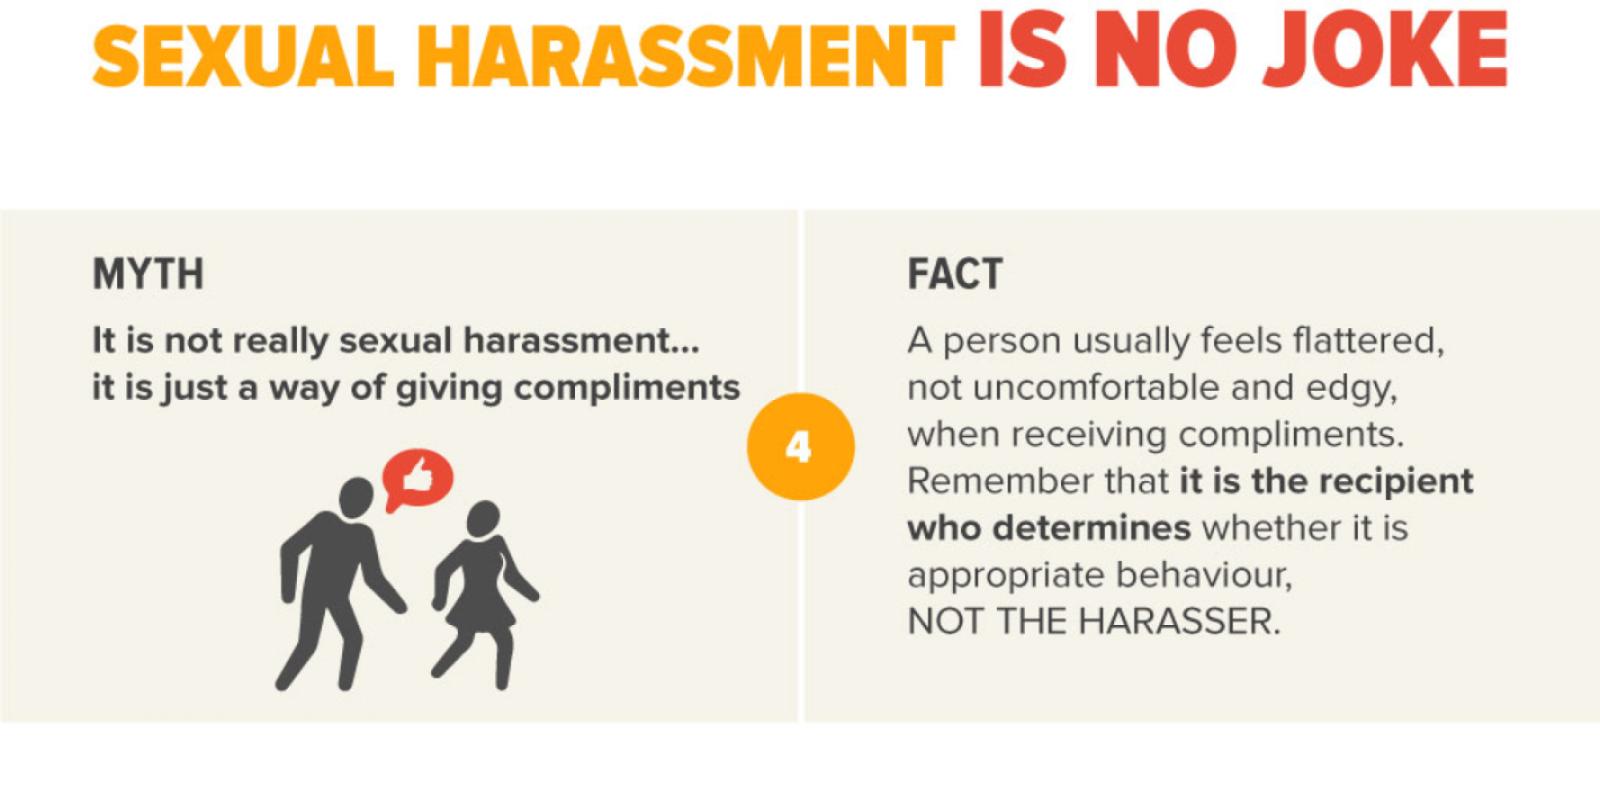 MYTH It is not really sexual harassment…it is just a way of giving compliments  FACT  A person usually feels flattered, not uncomfortable and edgy, when receiving compliments.  Remember that it is the recipient who determines whether it is appropriate behaviour, NOT THE HARASSER.